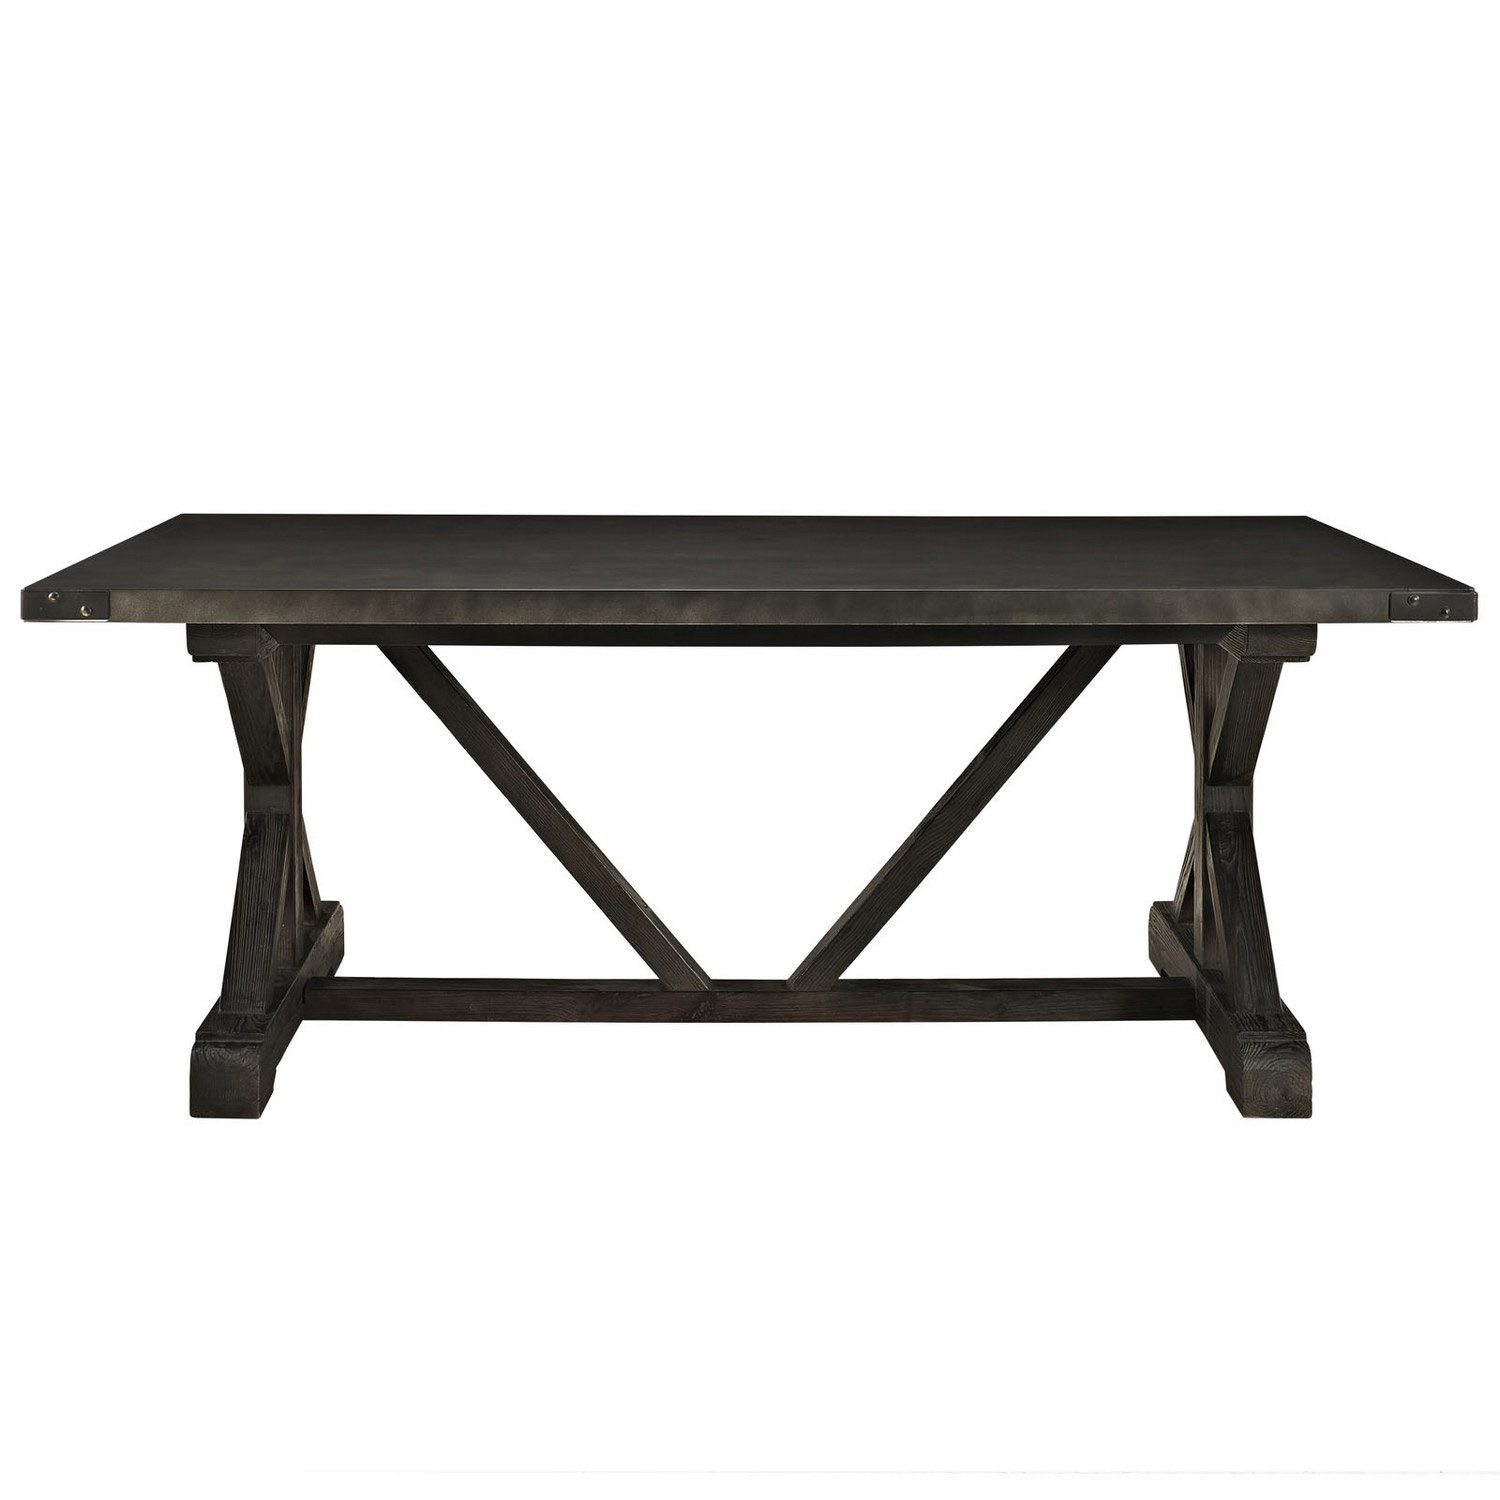 Modway Anvil Wood Dining Table - Black